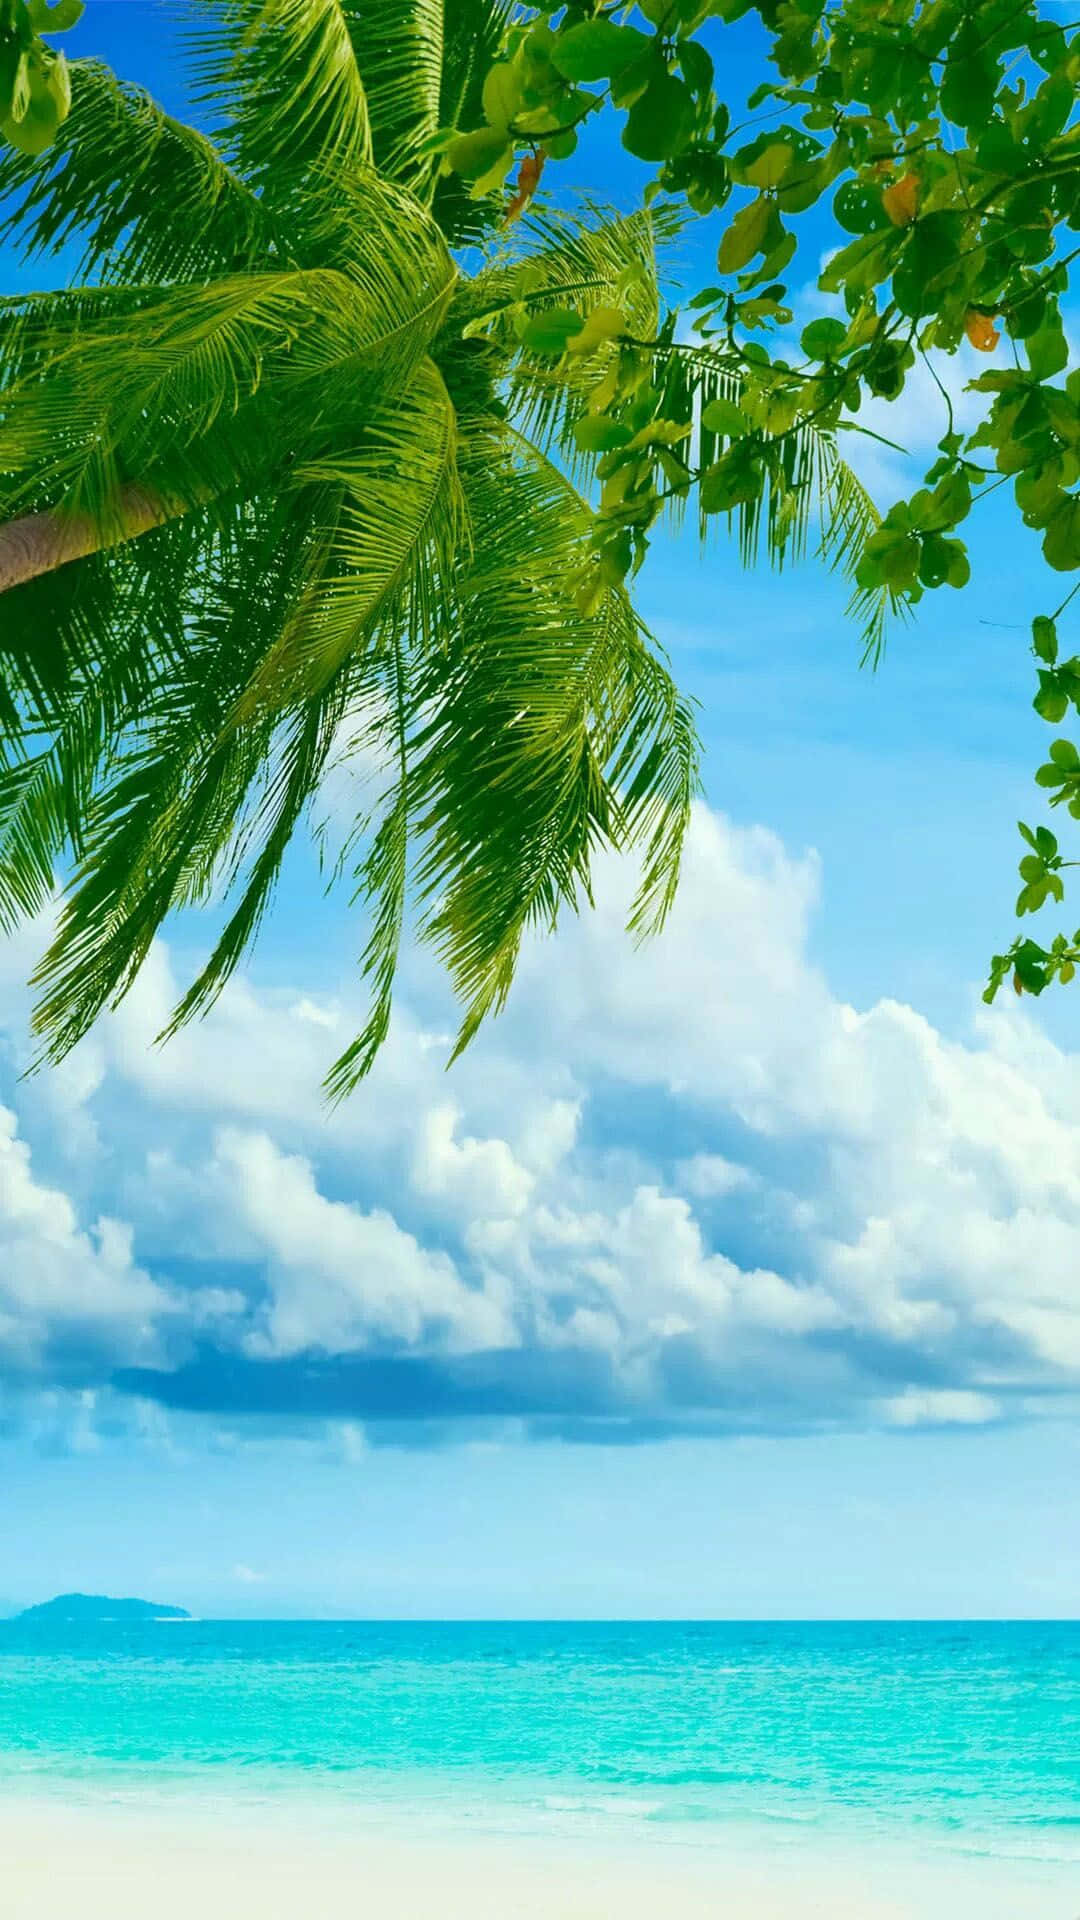 Enjoying a calm day at the beach with an oceanfront view of palm trees. Wallpaper